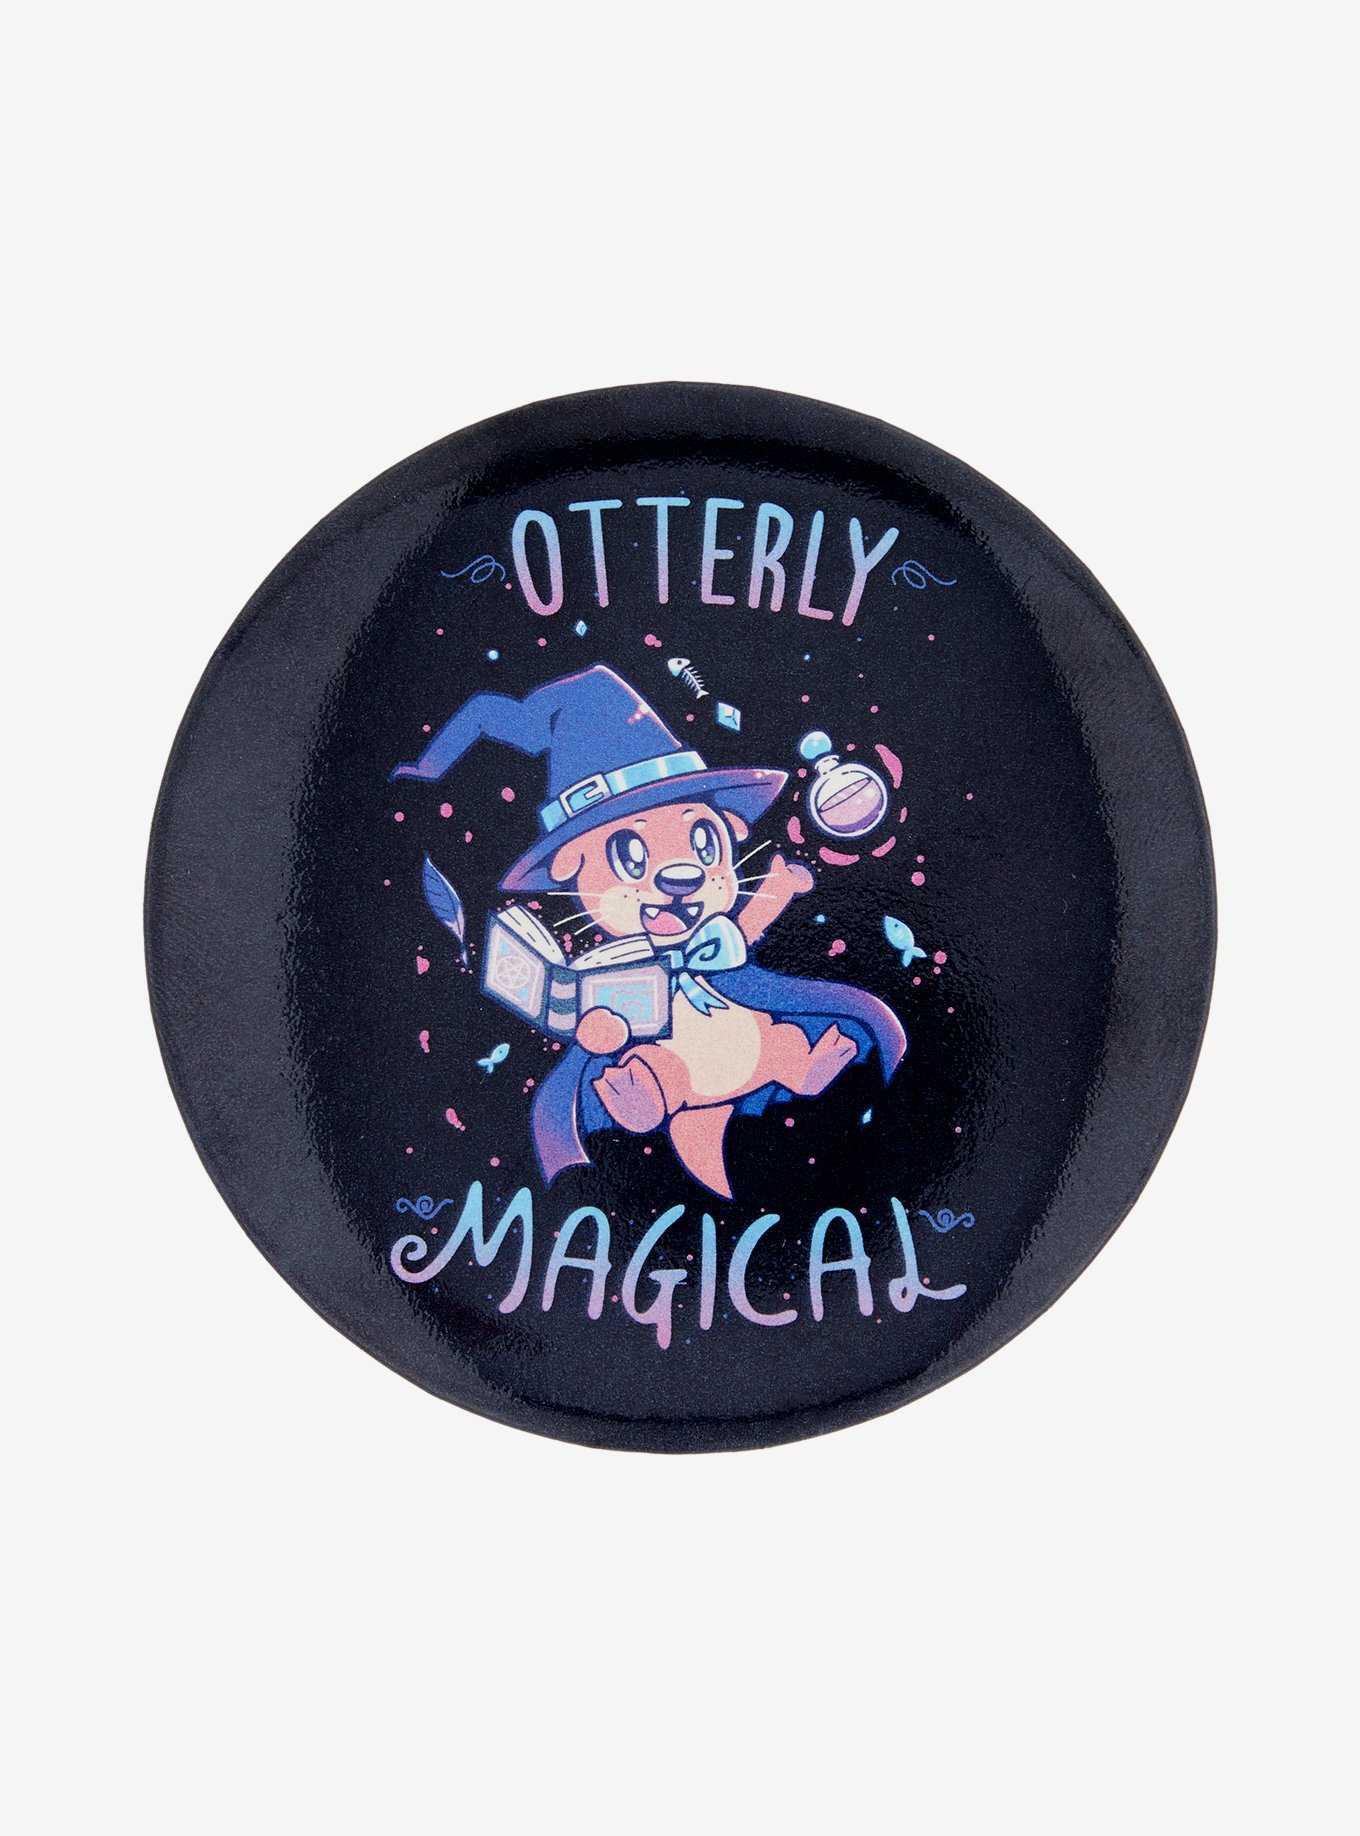 Otterly Magical 3 Inch Button, , hi-res